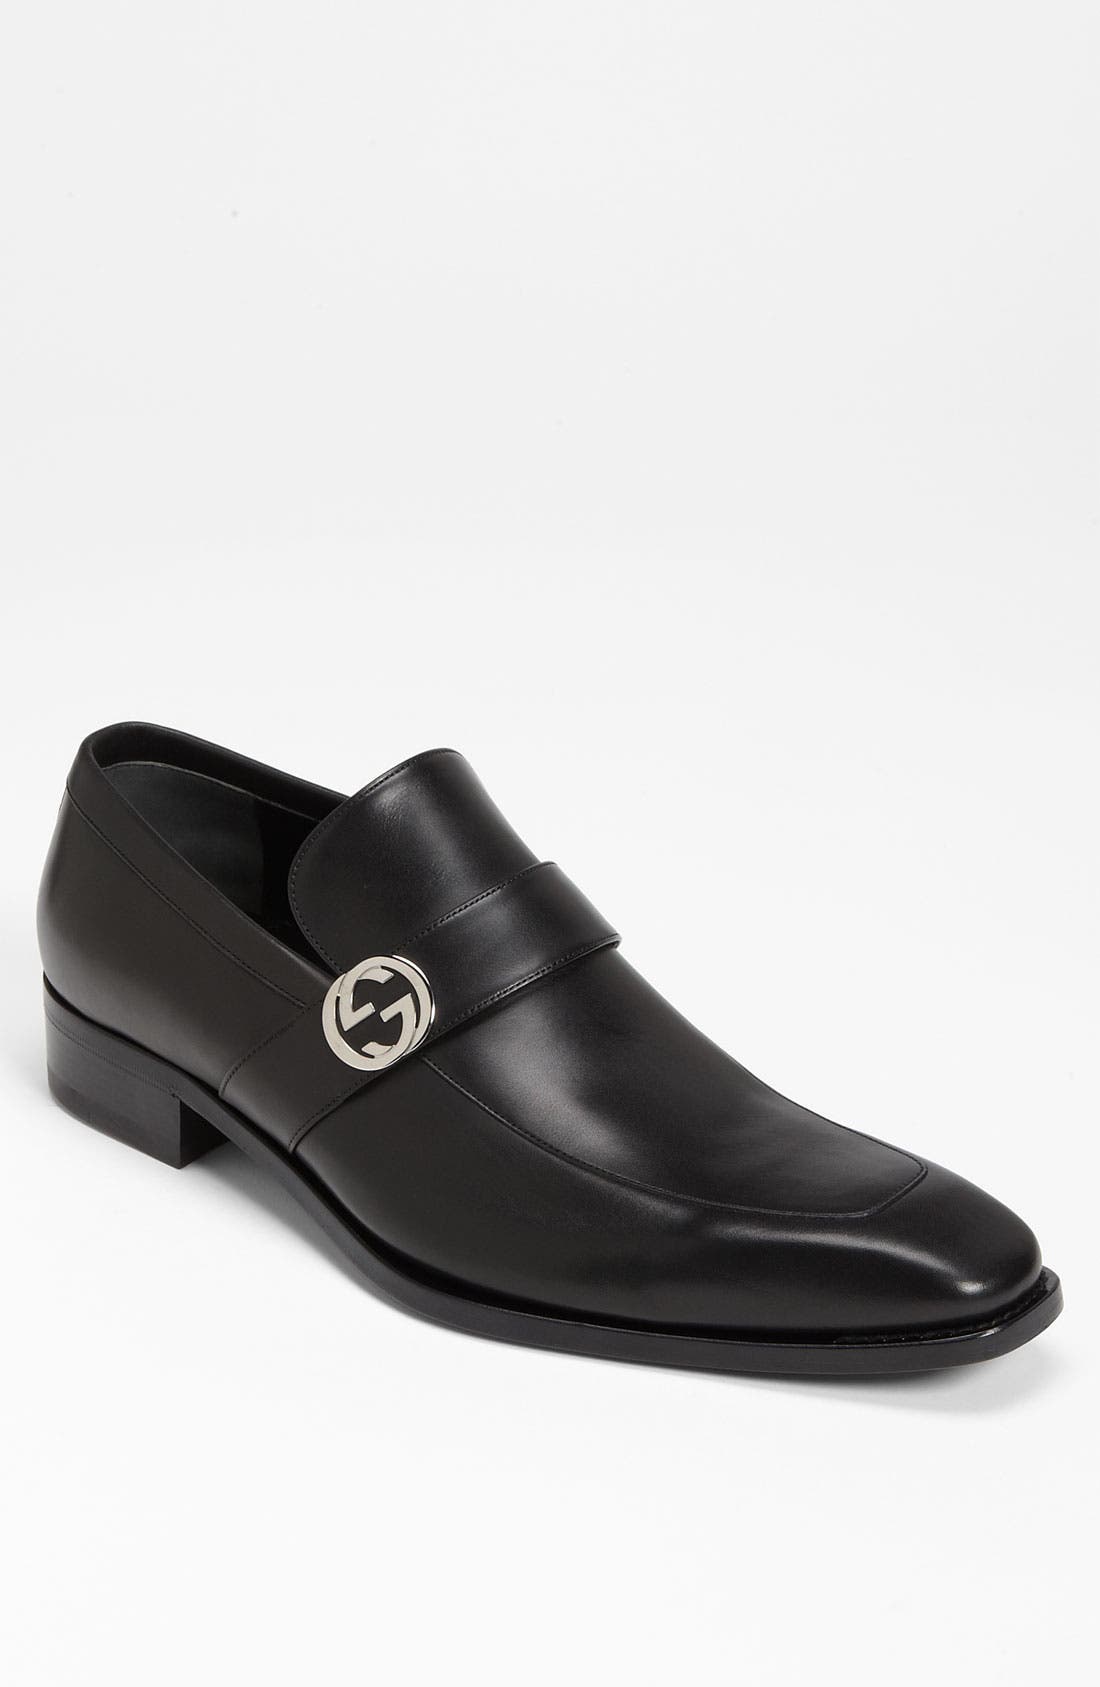 Gucci 'Double G' Loafer | Nordstrom